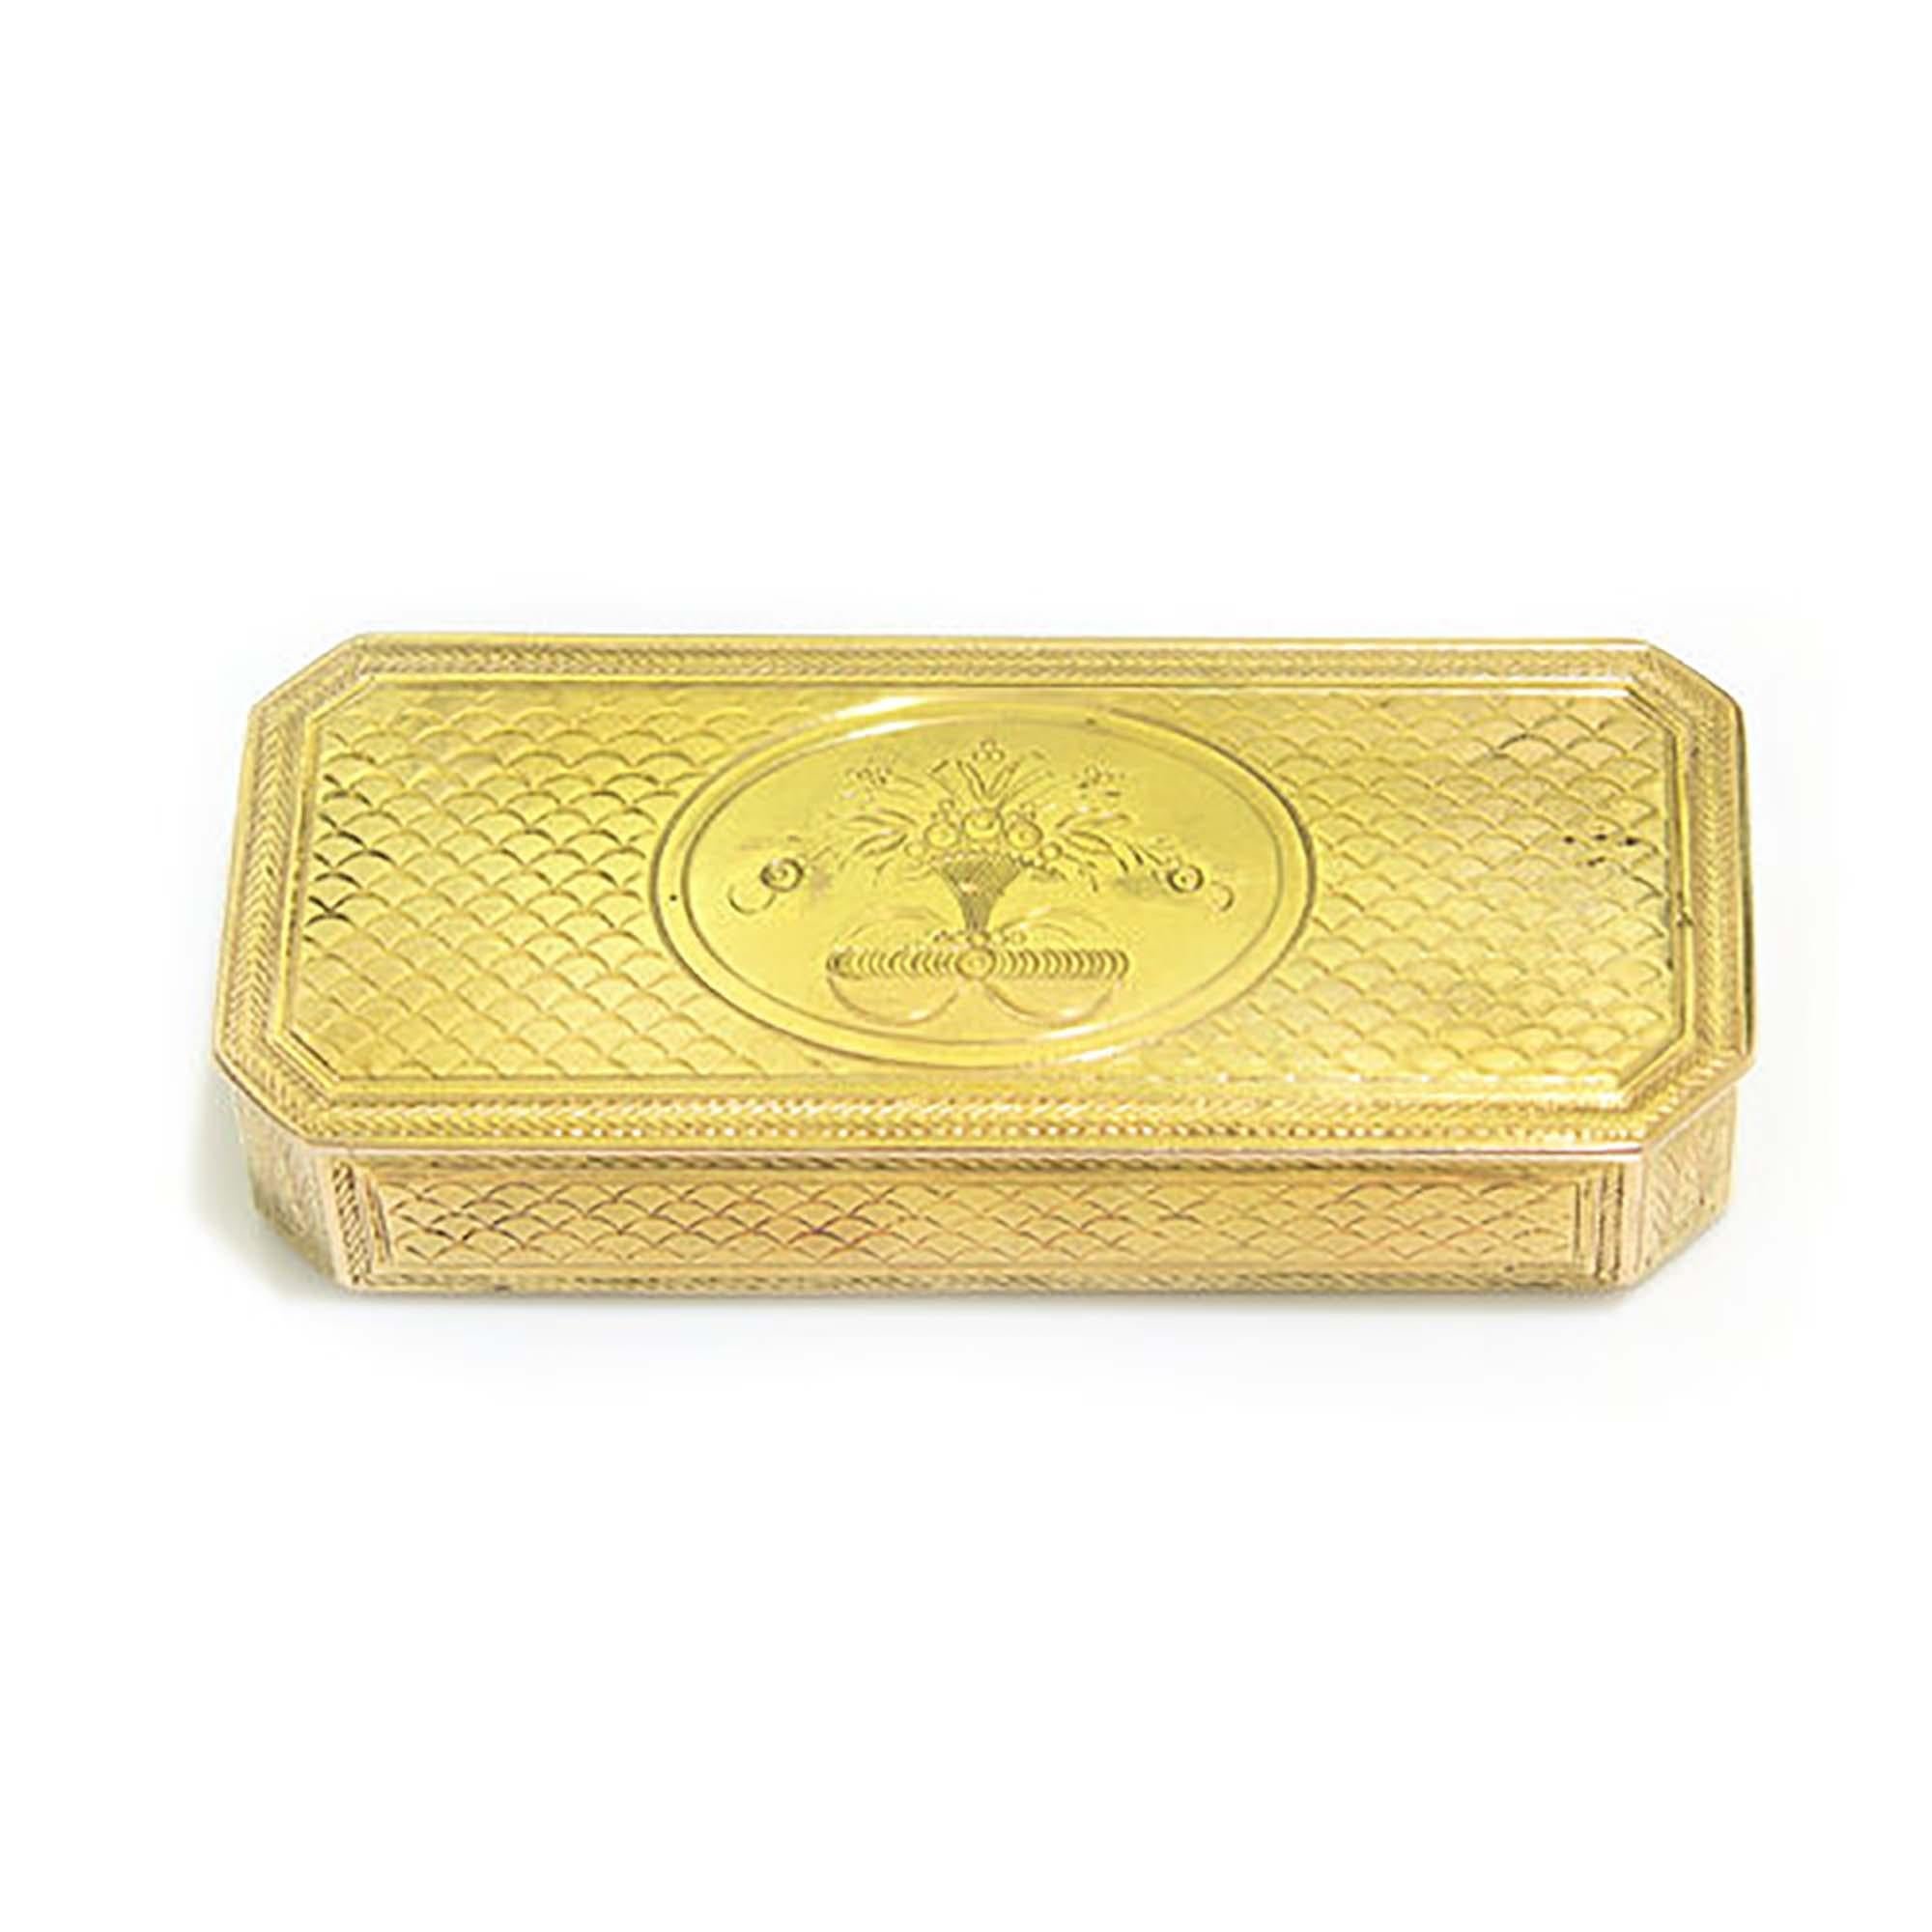 Antique French 18kt yellow gold box.

Hallmarked with owl, French hallmark for imported 18kt gold.
Made in France late 19th century.

Makers Mark: PSC, Unidentified.

Dimensions:
Size: 8 x 3.5 x 1.5 cm
Weight: 43 grams

Condition: Box has